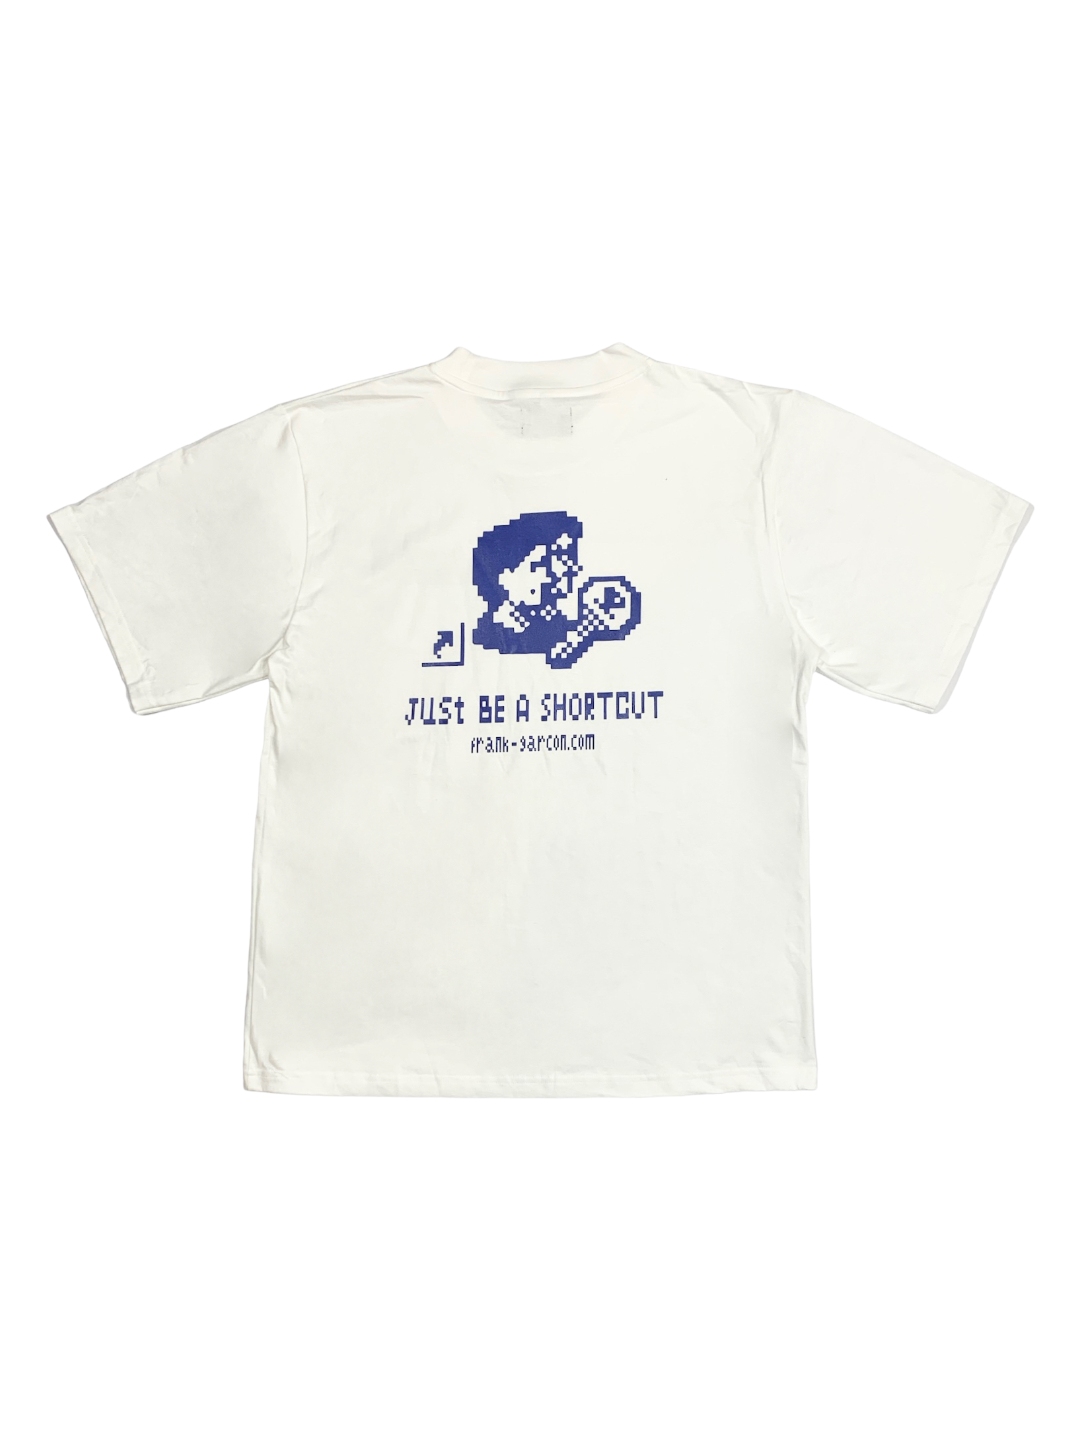 Just be a shortcut Tee (White)